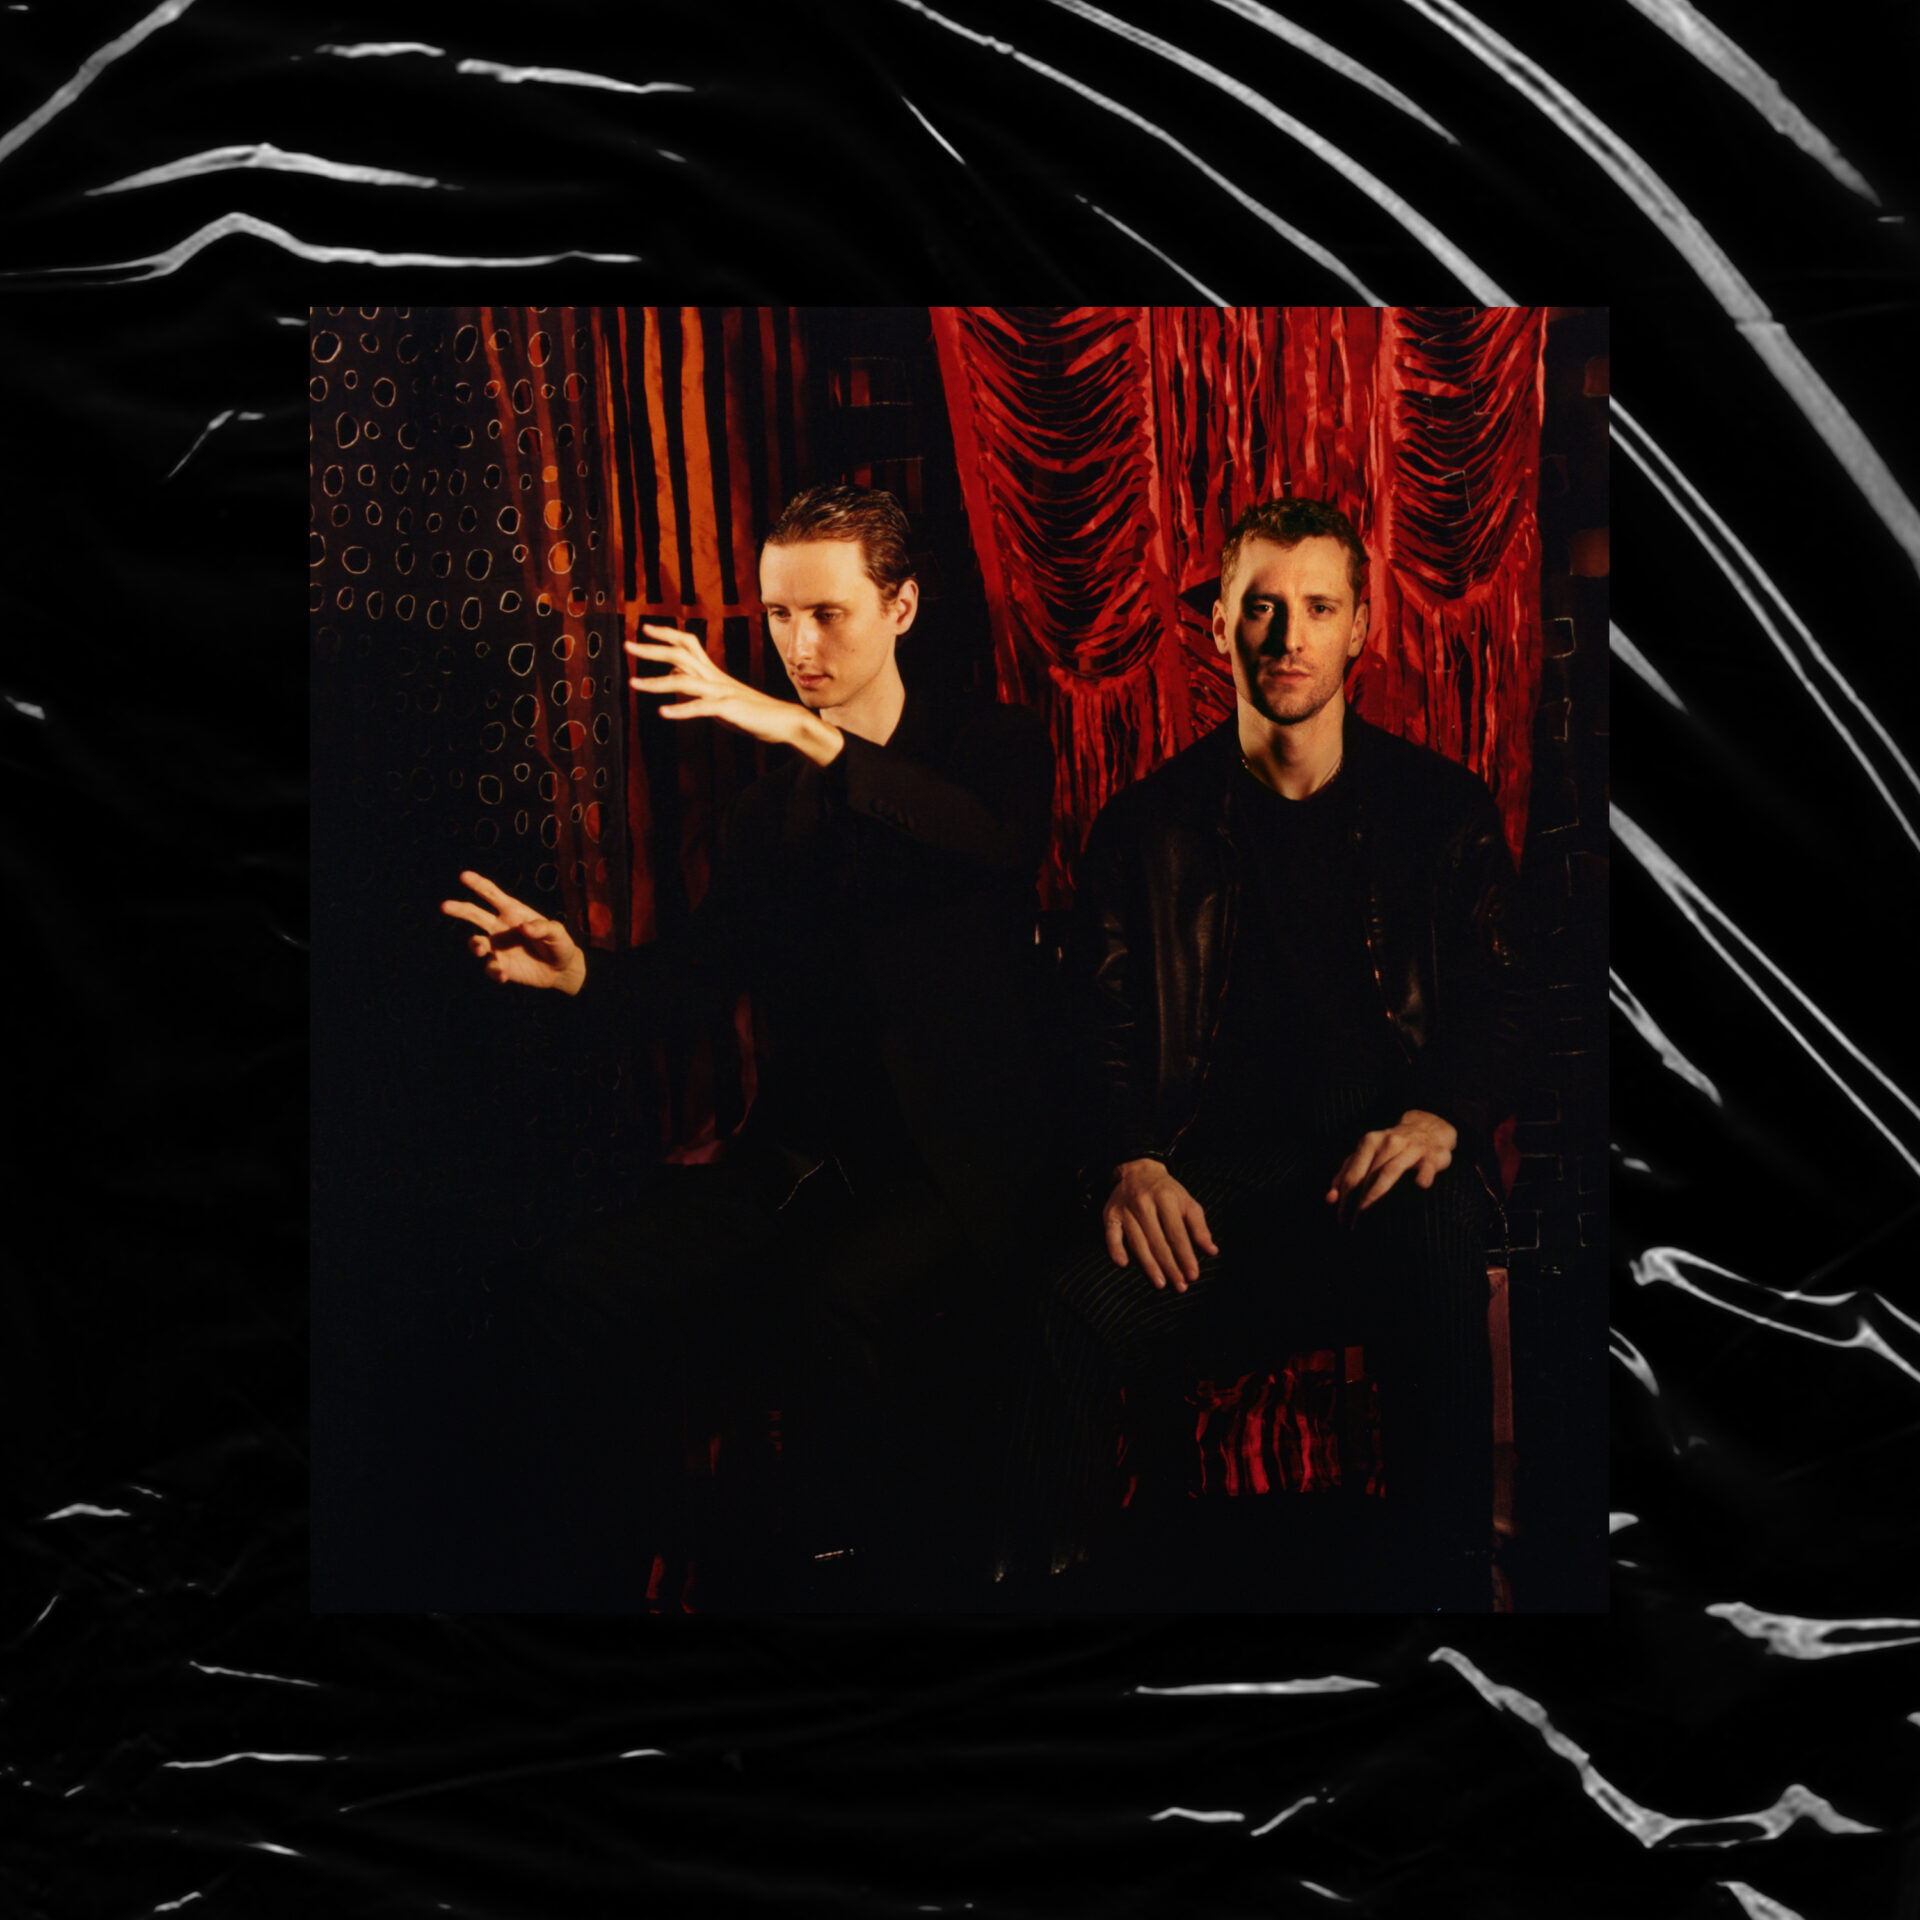 Video of the Week #106: These New Puritans - Inside The Rose